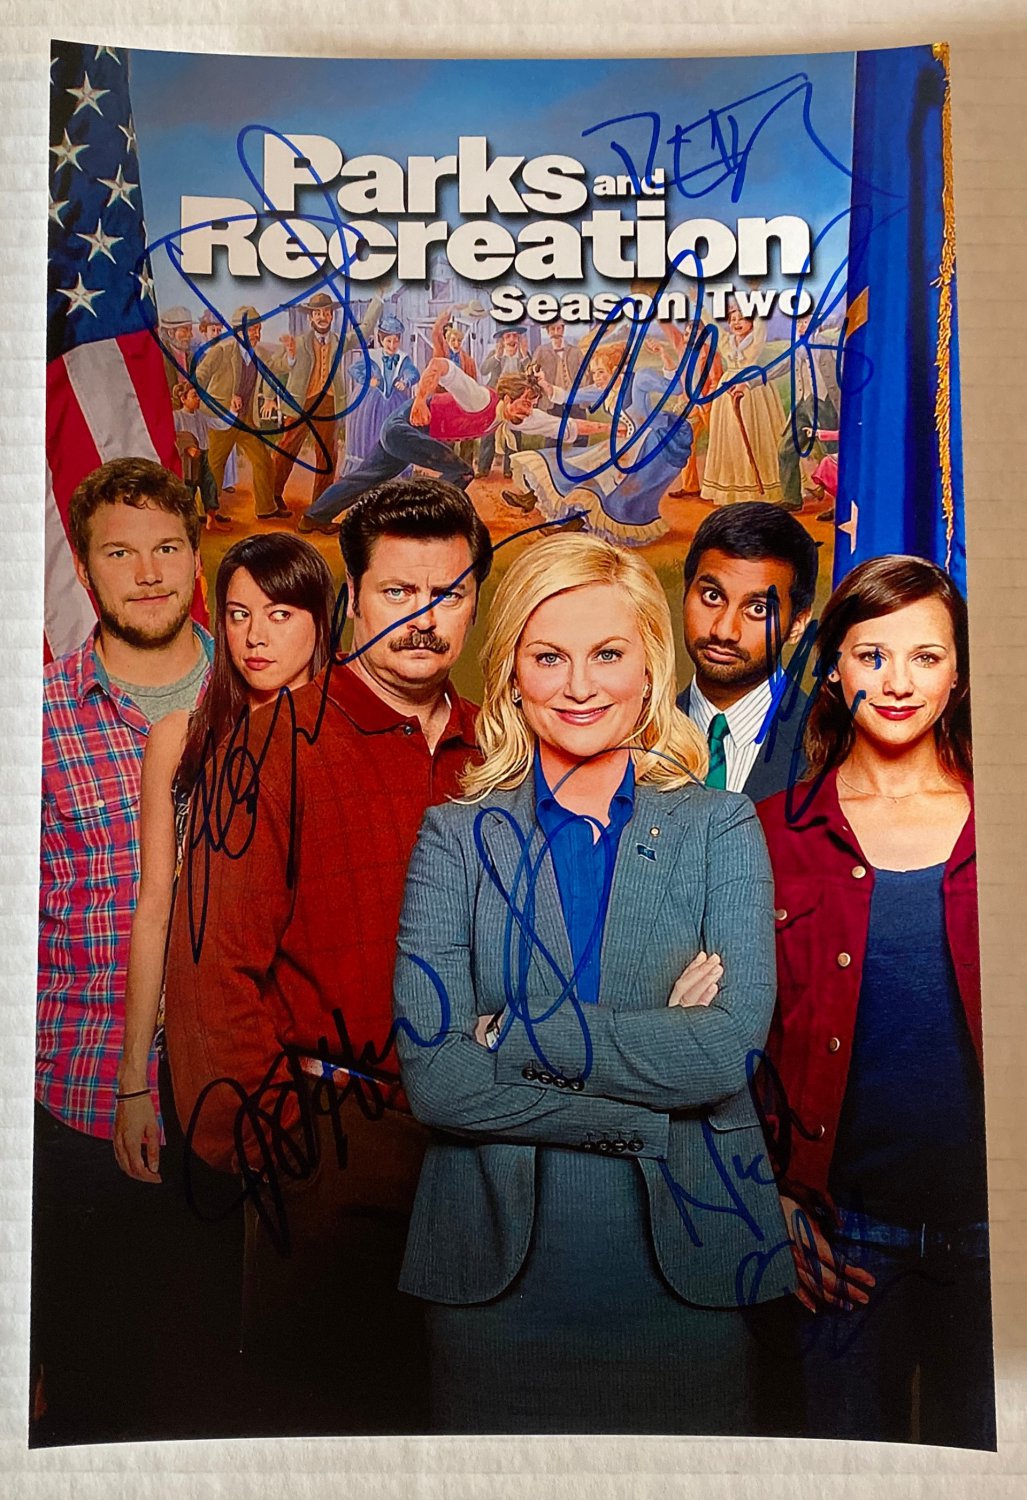 Parks and Recreation cast signed autographed 8x12 photo Amy Poehler Nick Offerman autographs